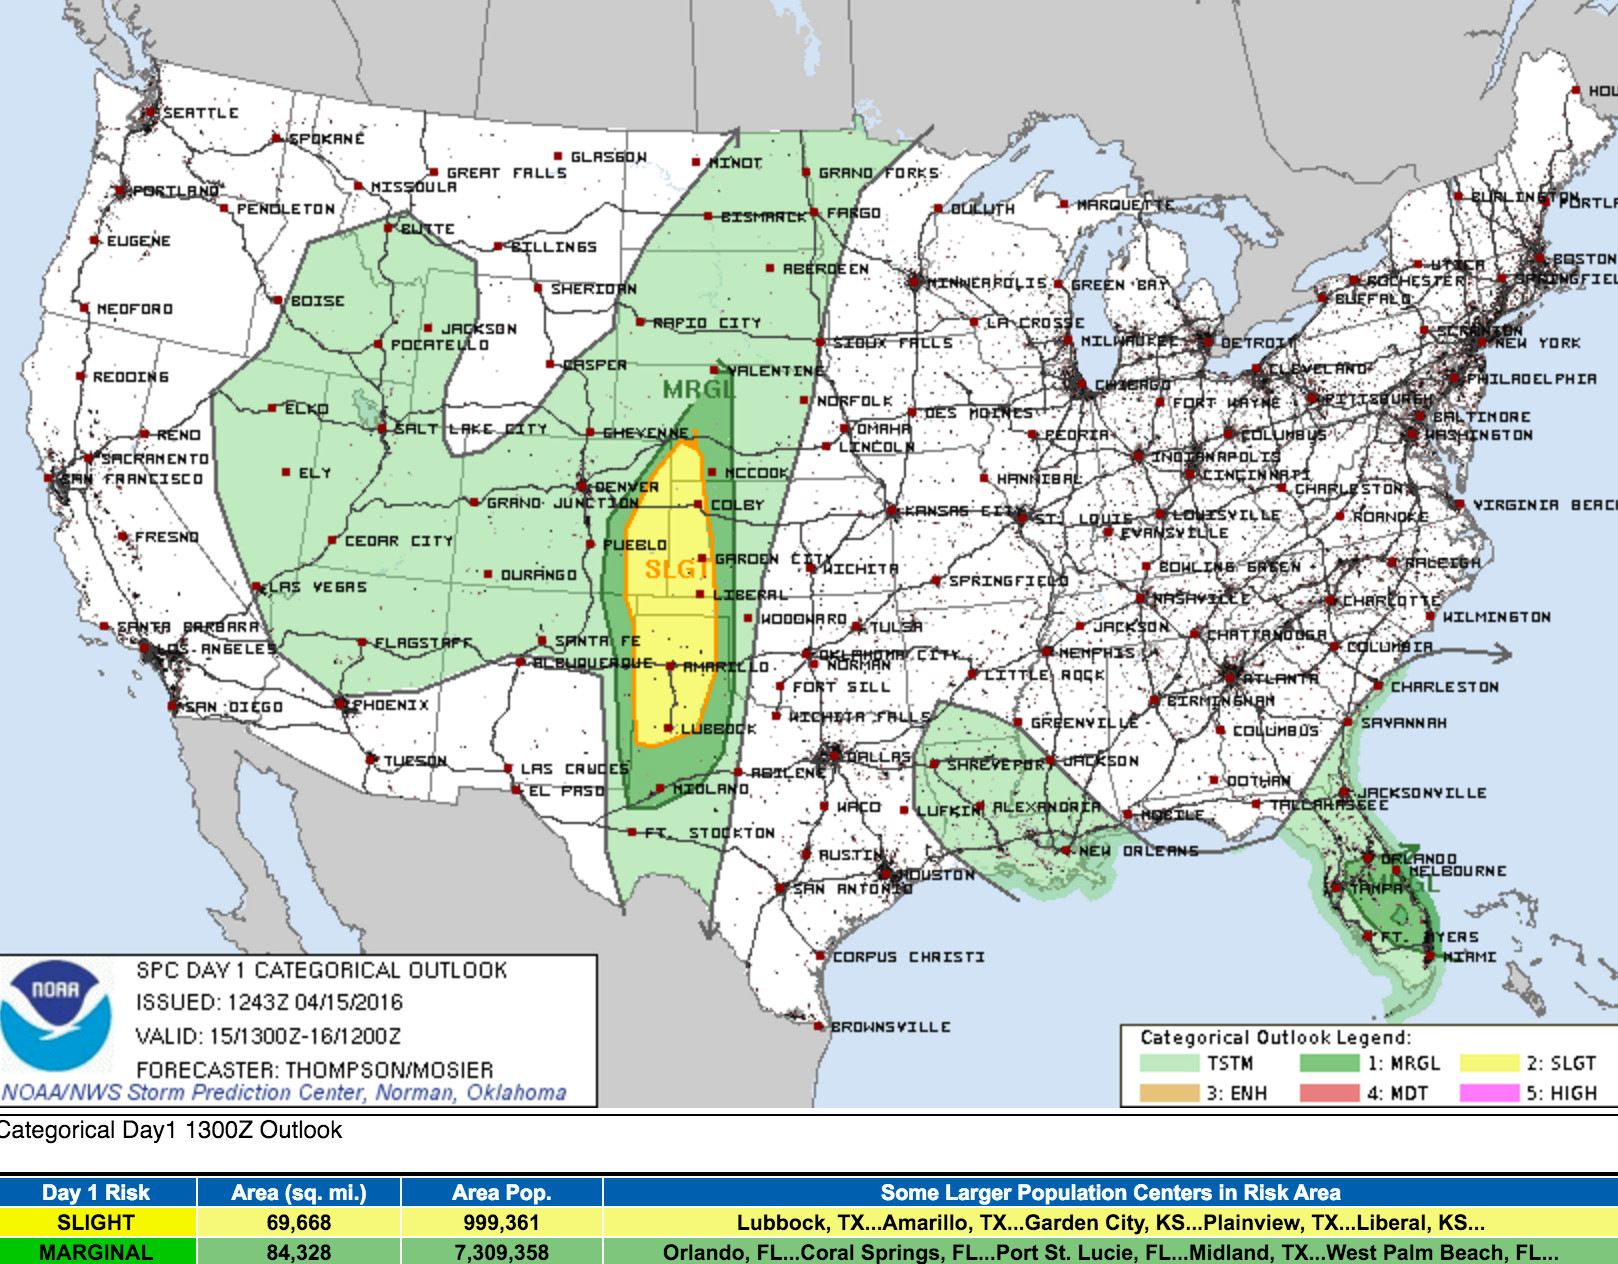 SPC severe weather outlook for Friday, April 15, 2015